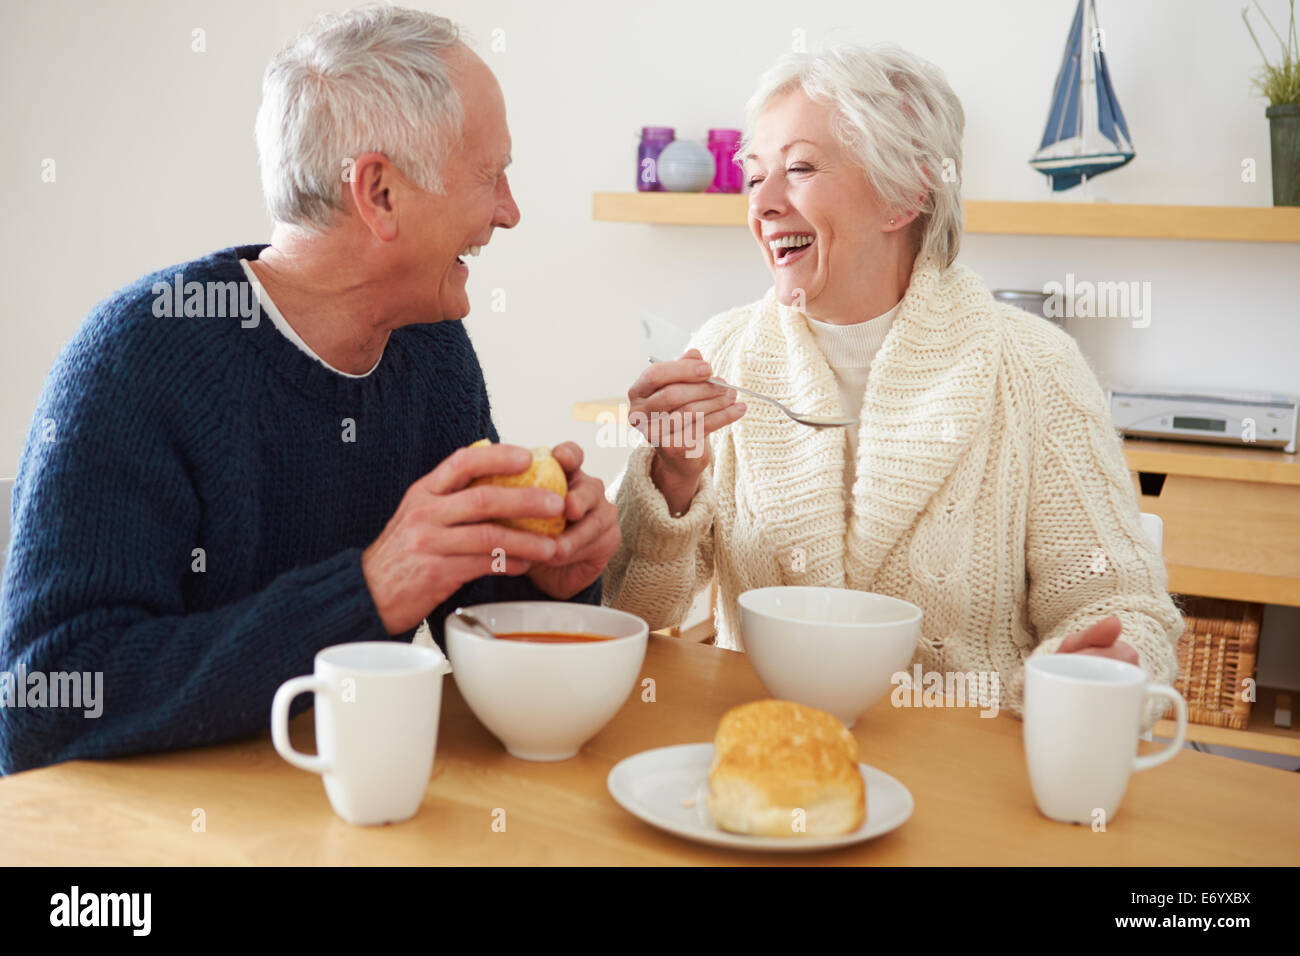 Senior Couple Having Bowl Of Soup For Lunch Stock Photo